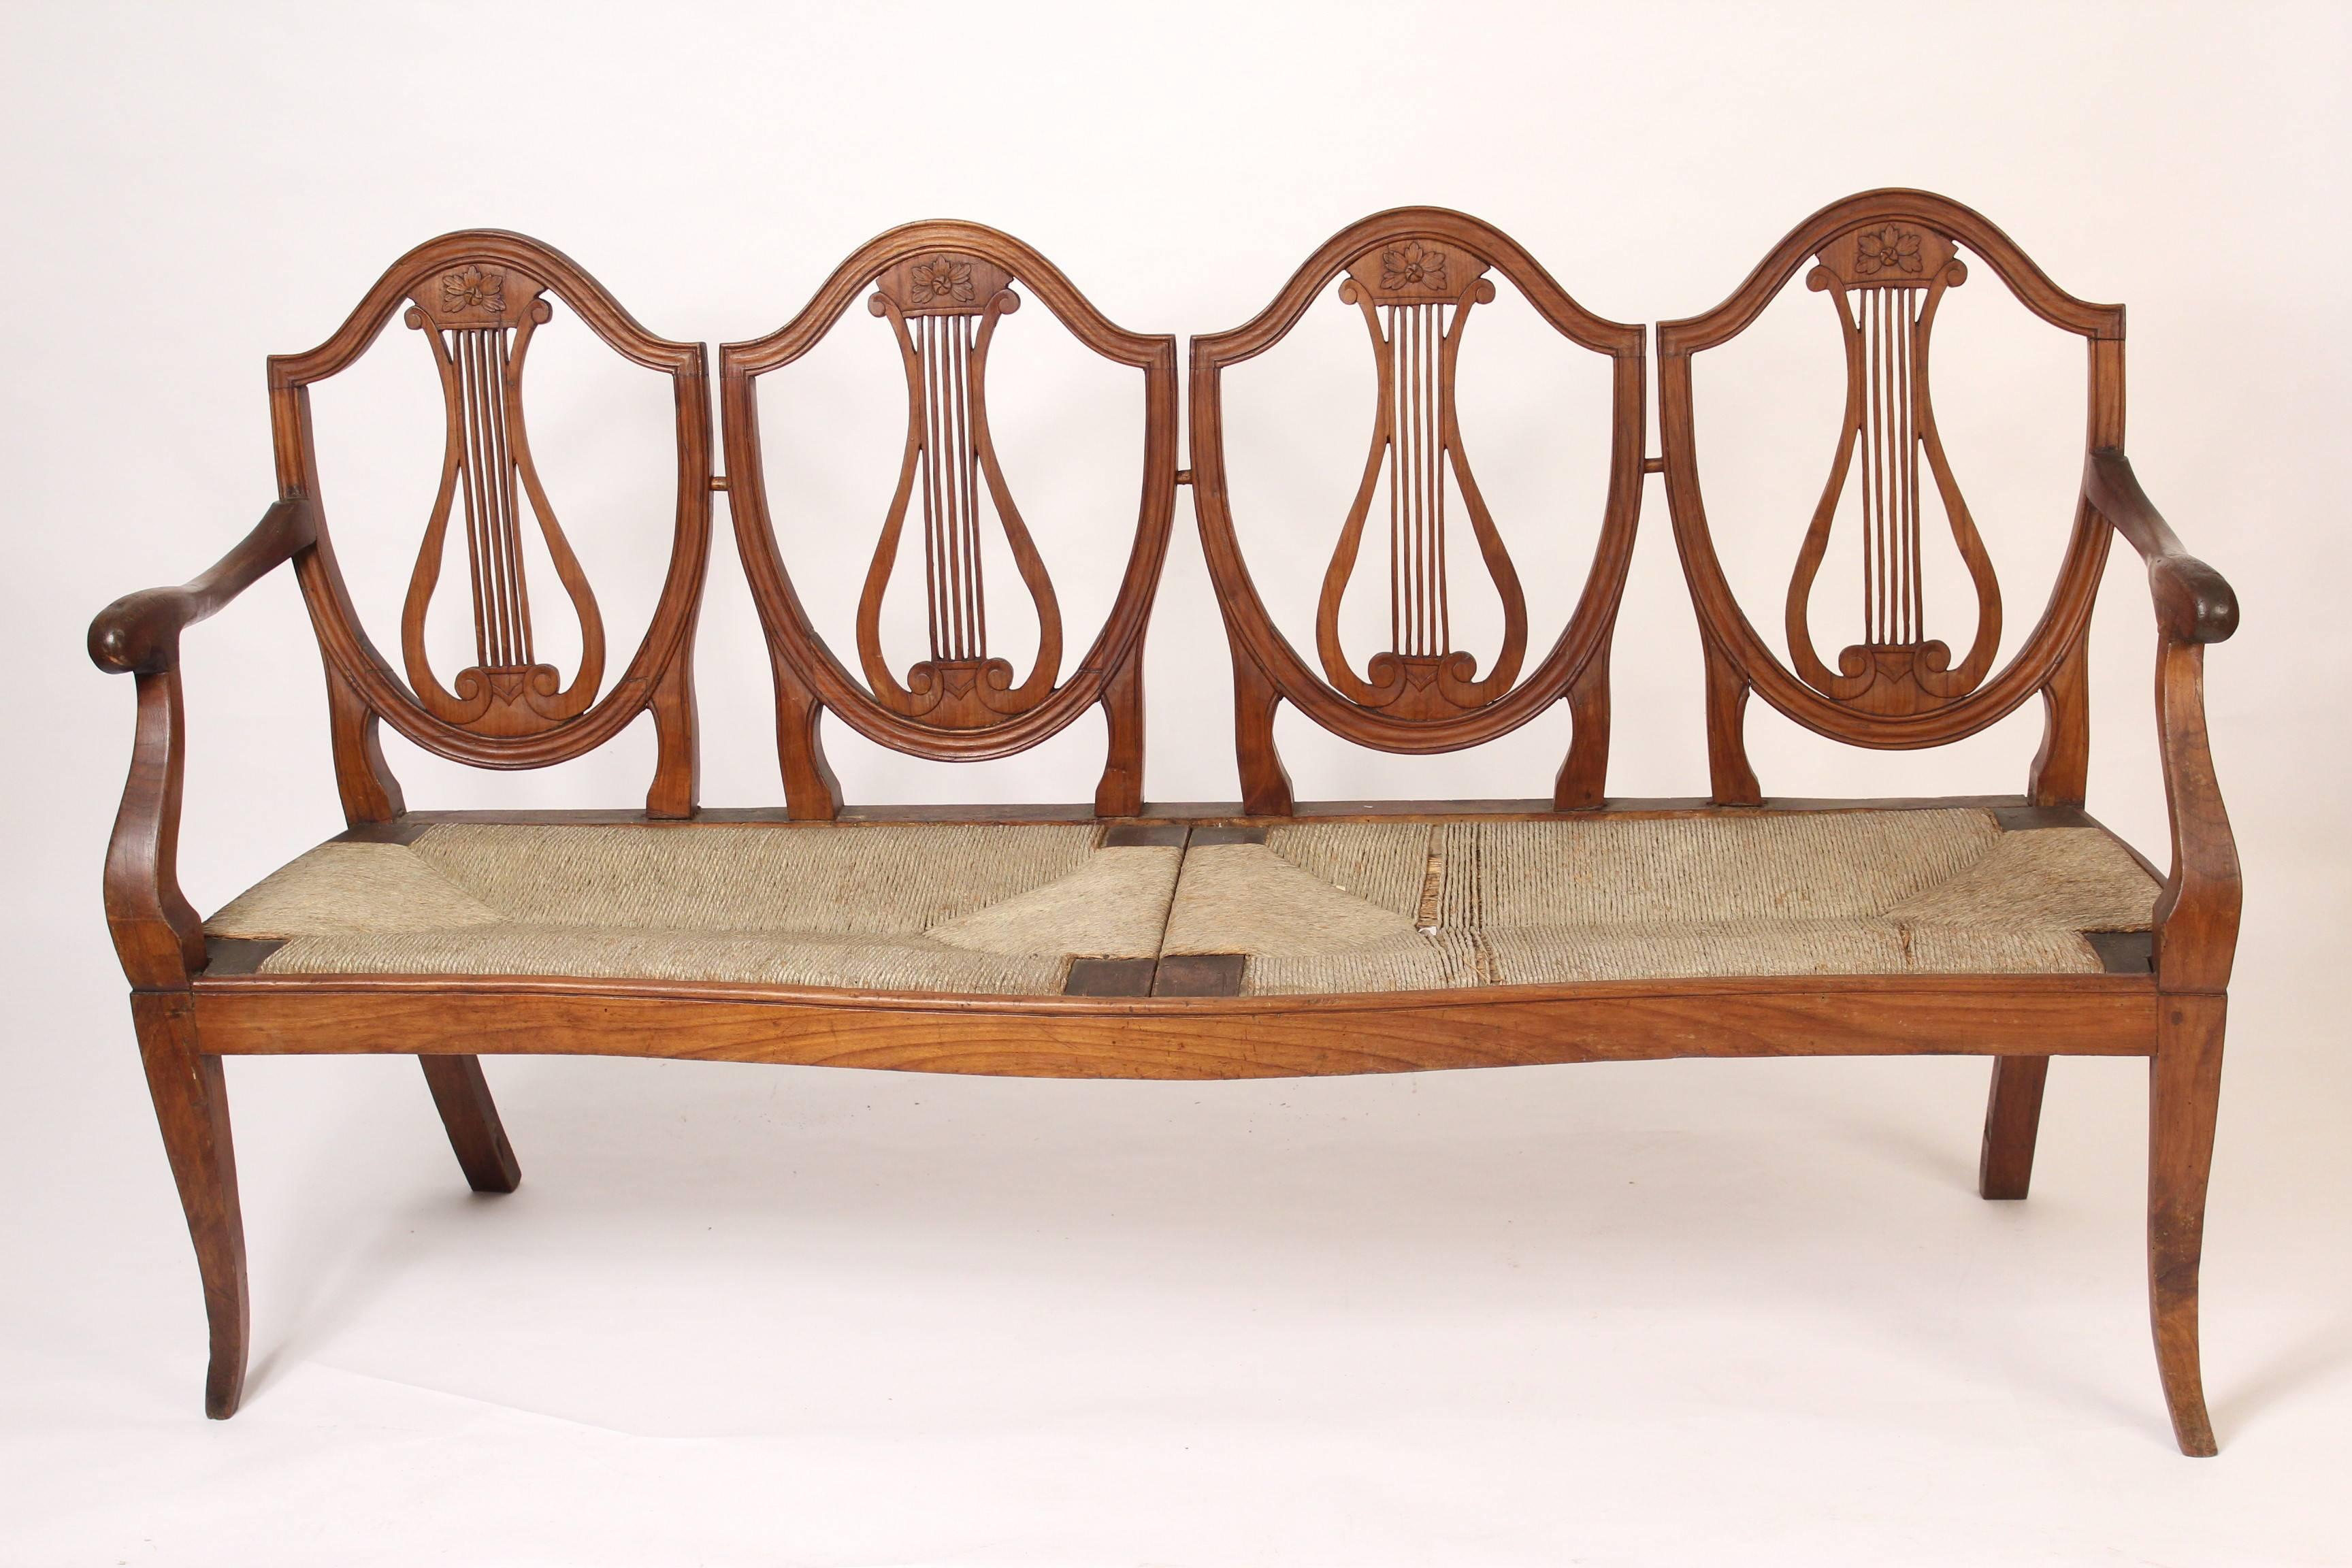 Continental fruitwood neoclassical settee with four shield backs, early 19th century. Measures: Seat height with cushion 20